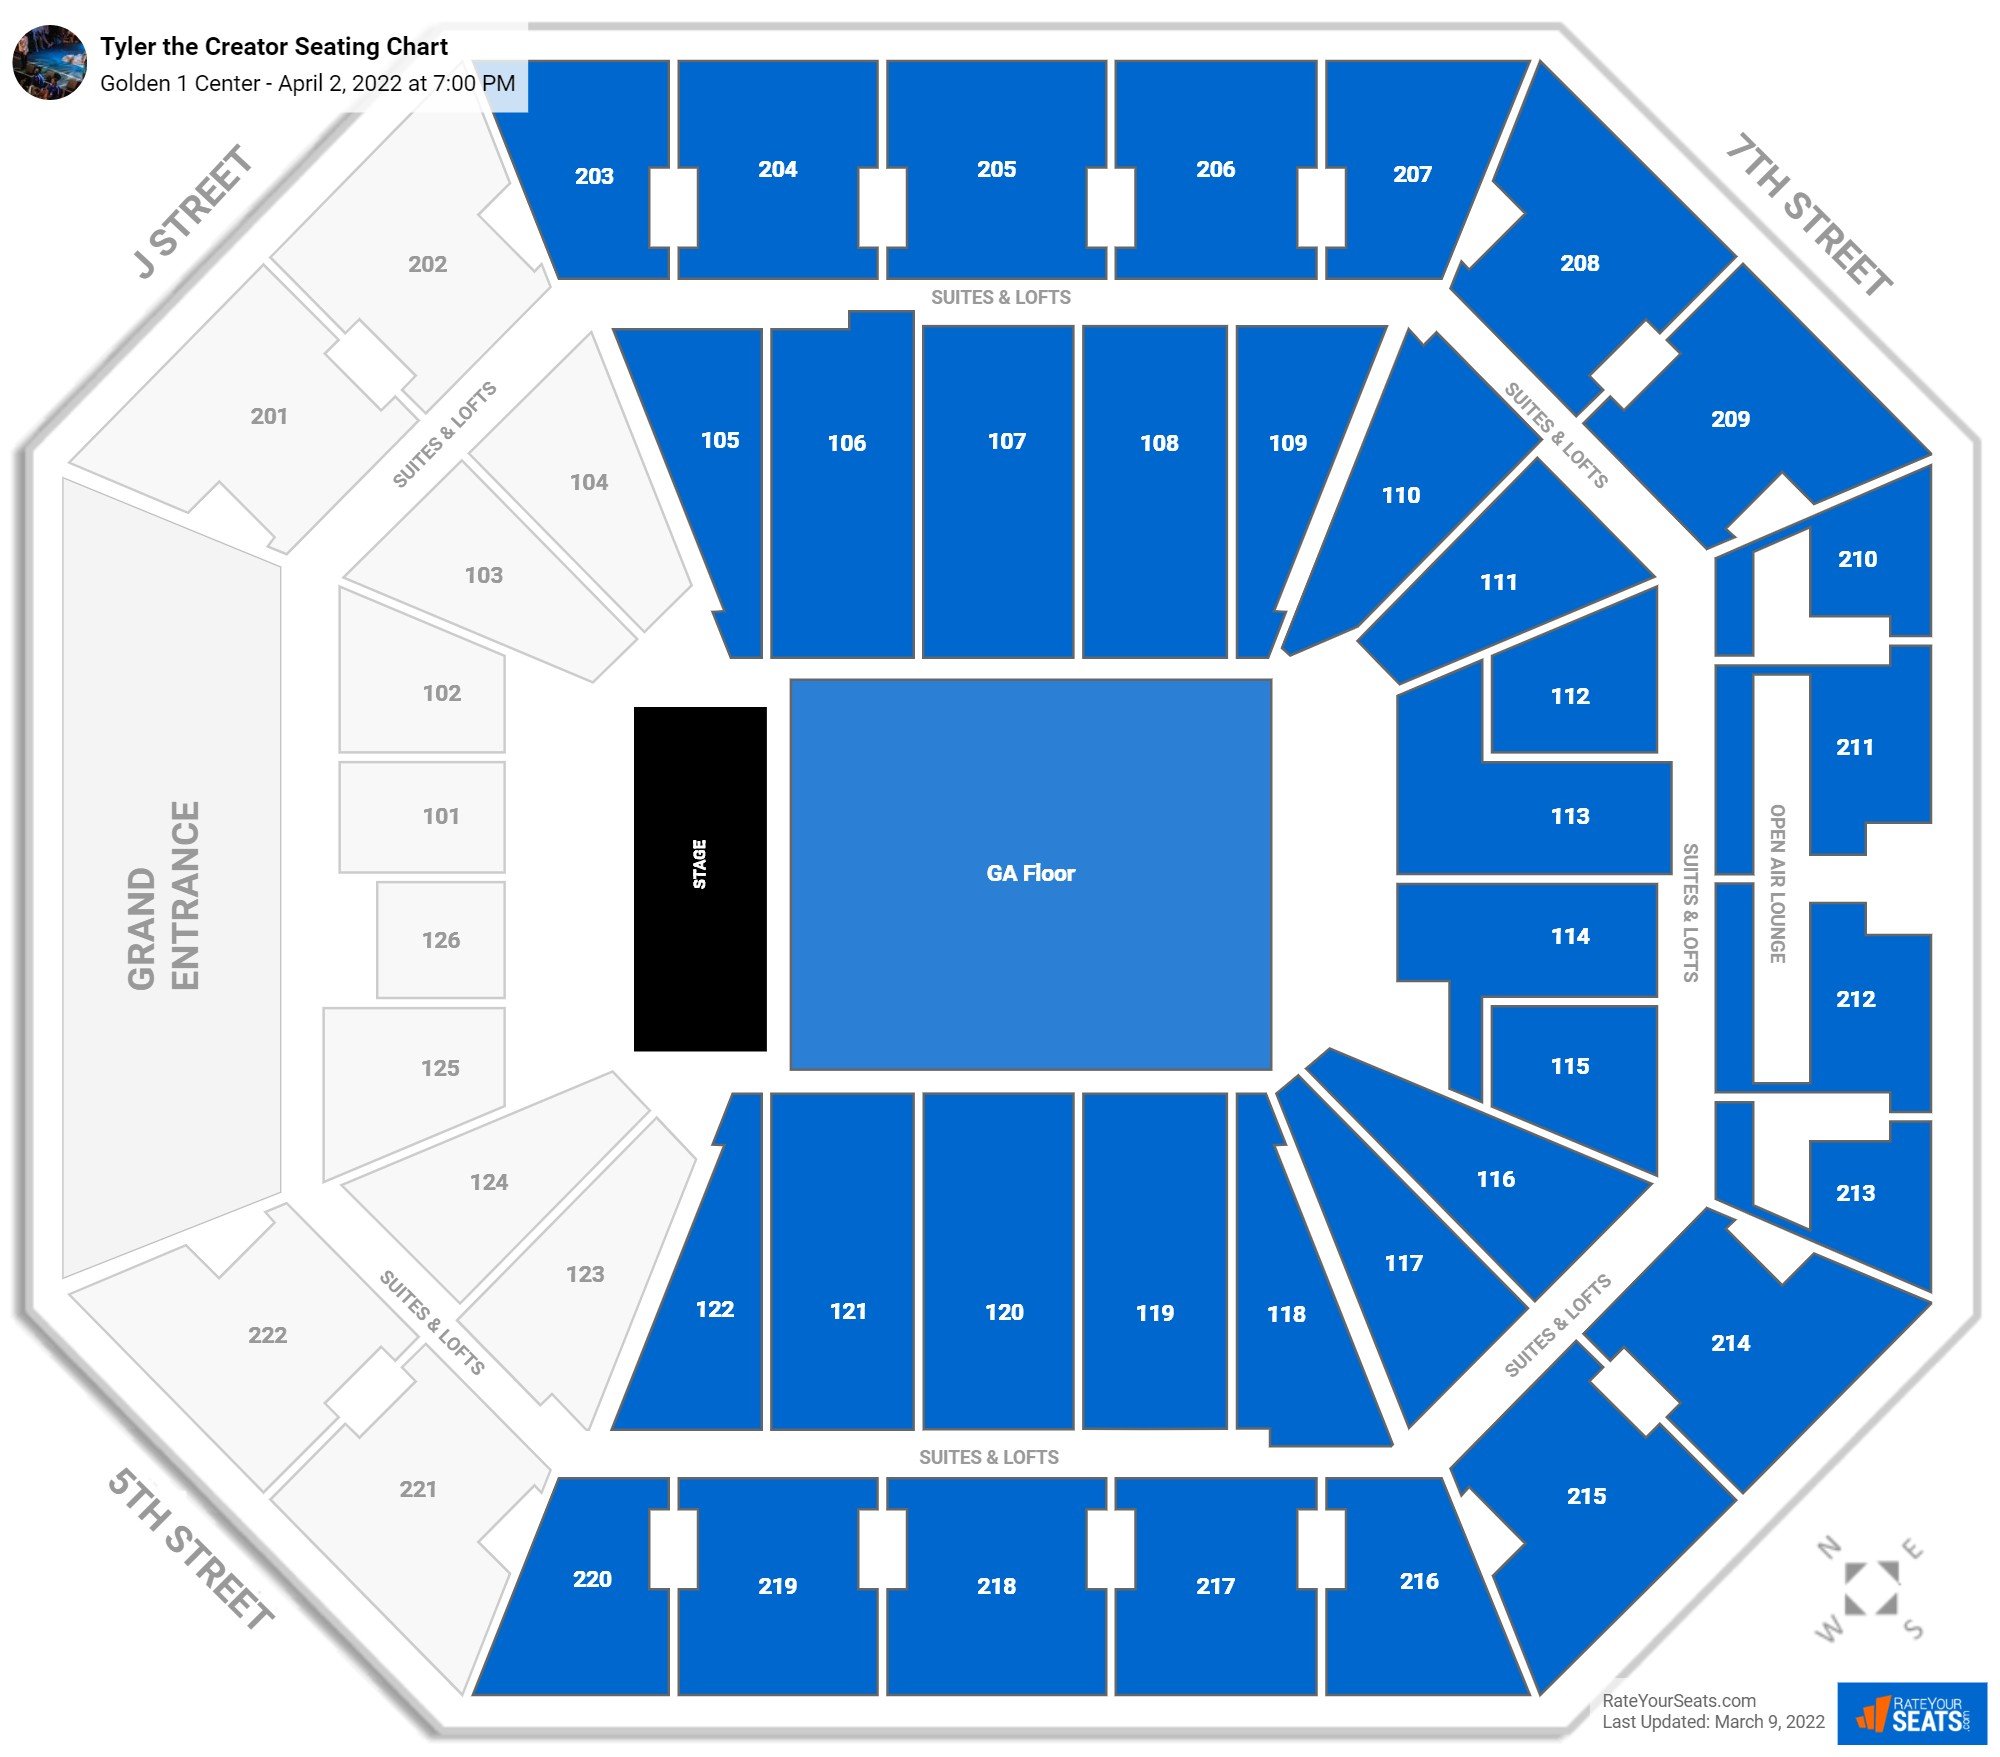 Golden 1 Center Seating Charts for Concerts